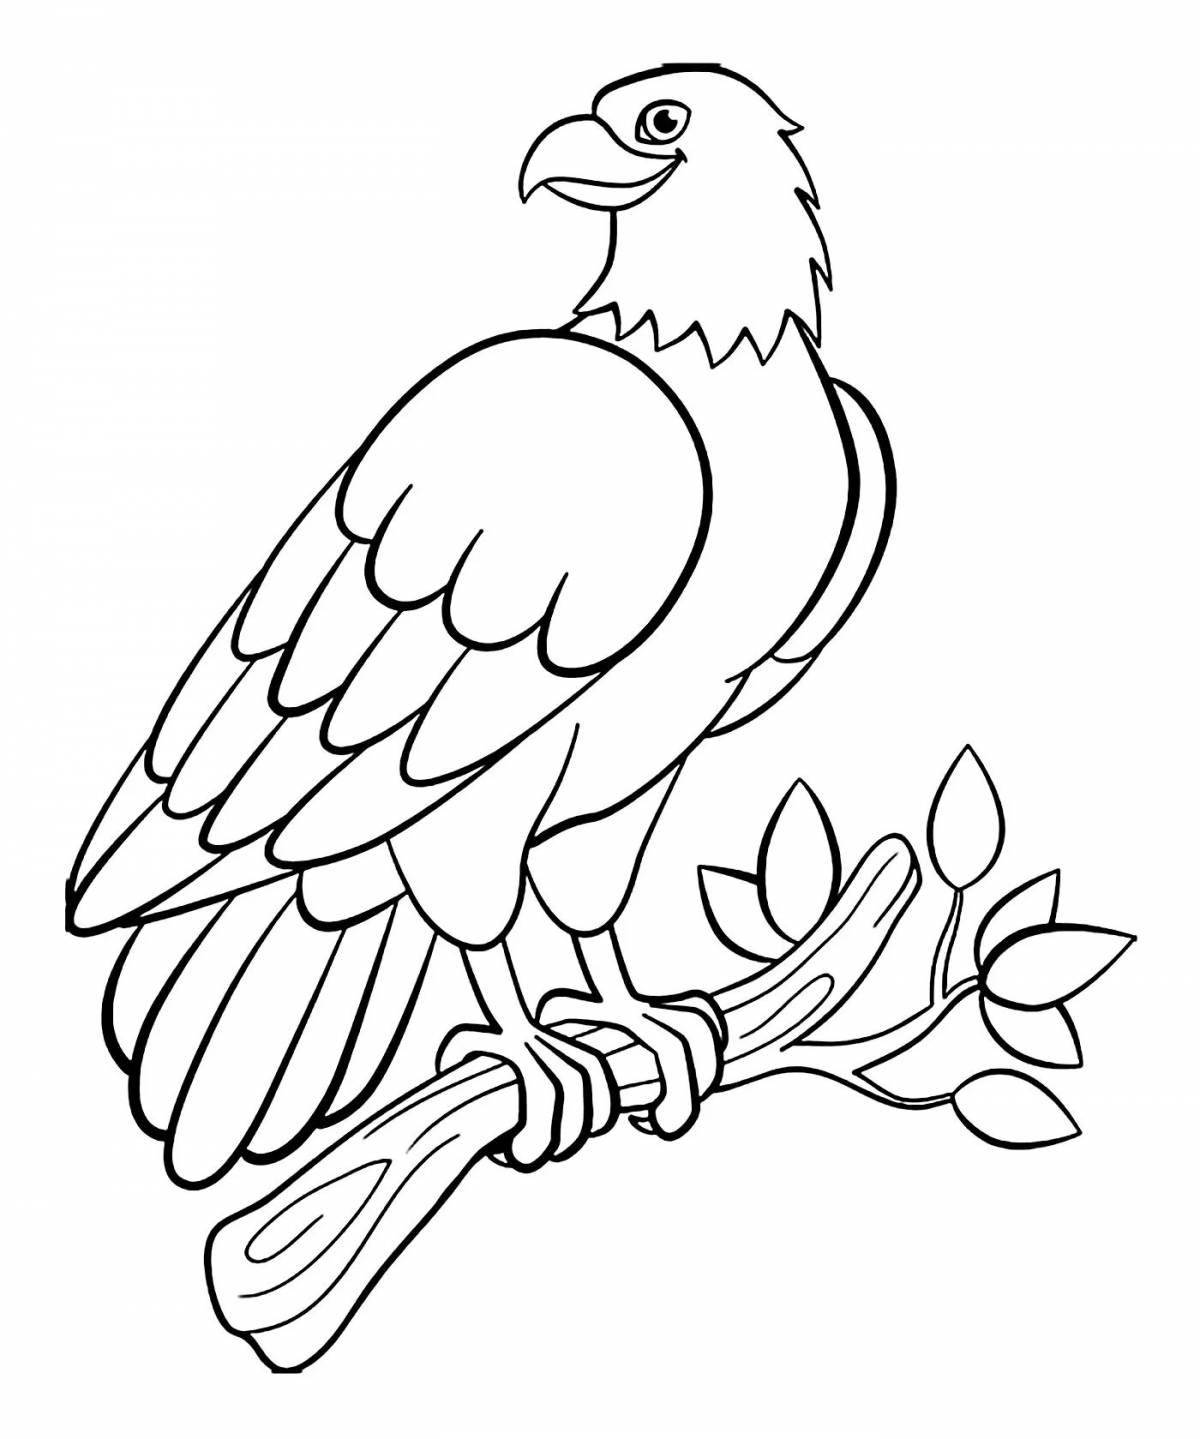 Great eaglet coloring page